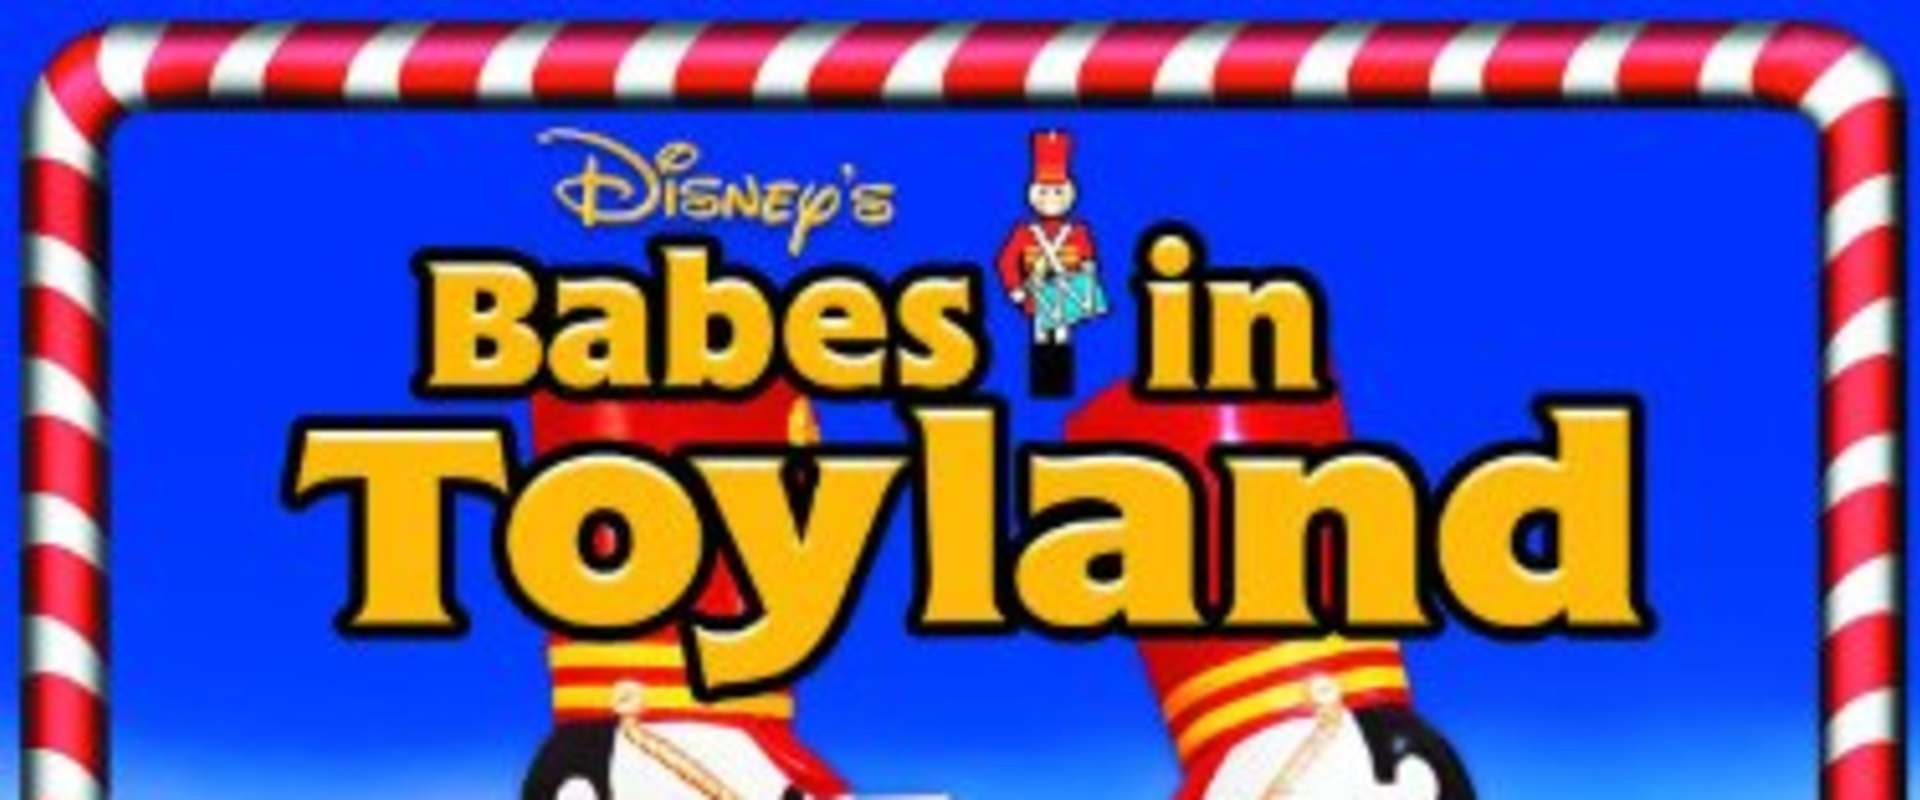 Babes in Toyland background 1